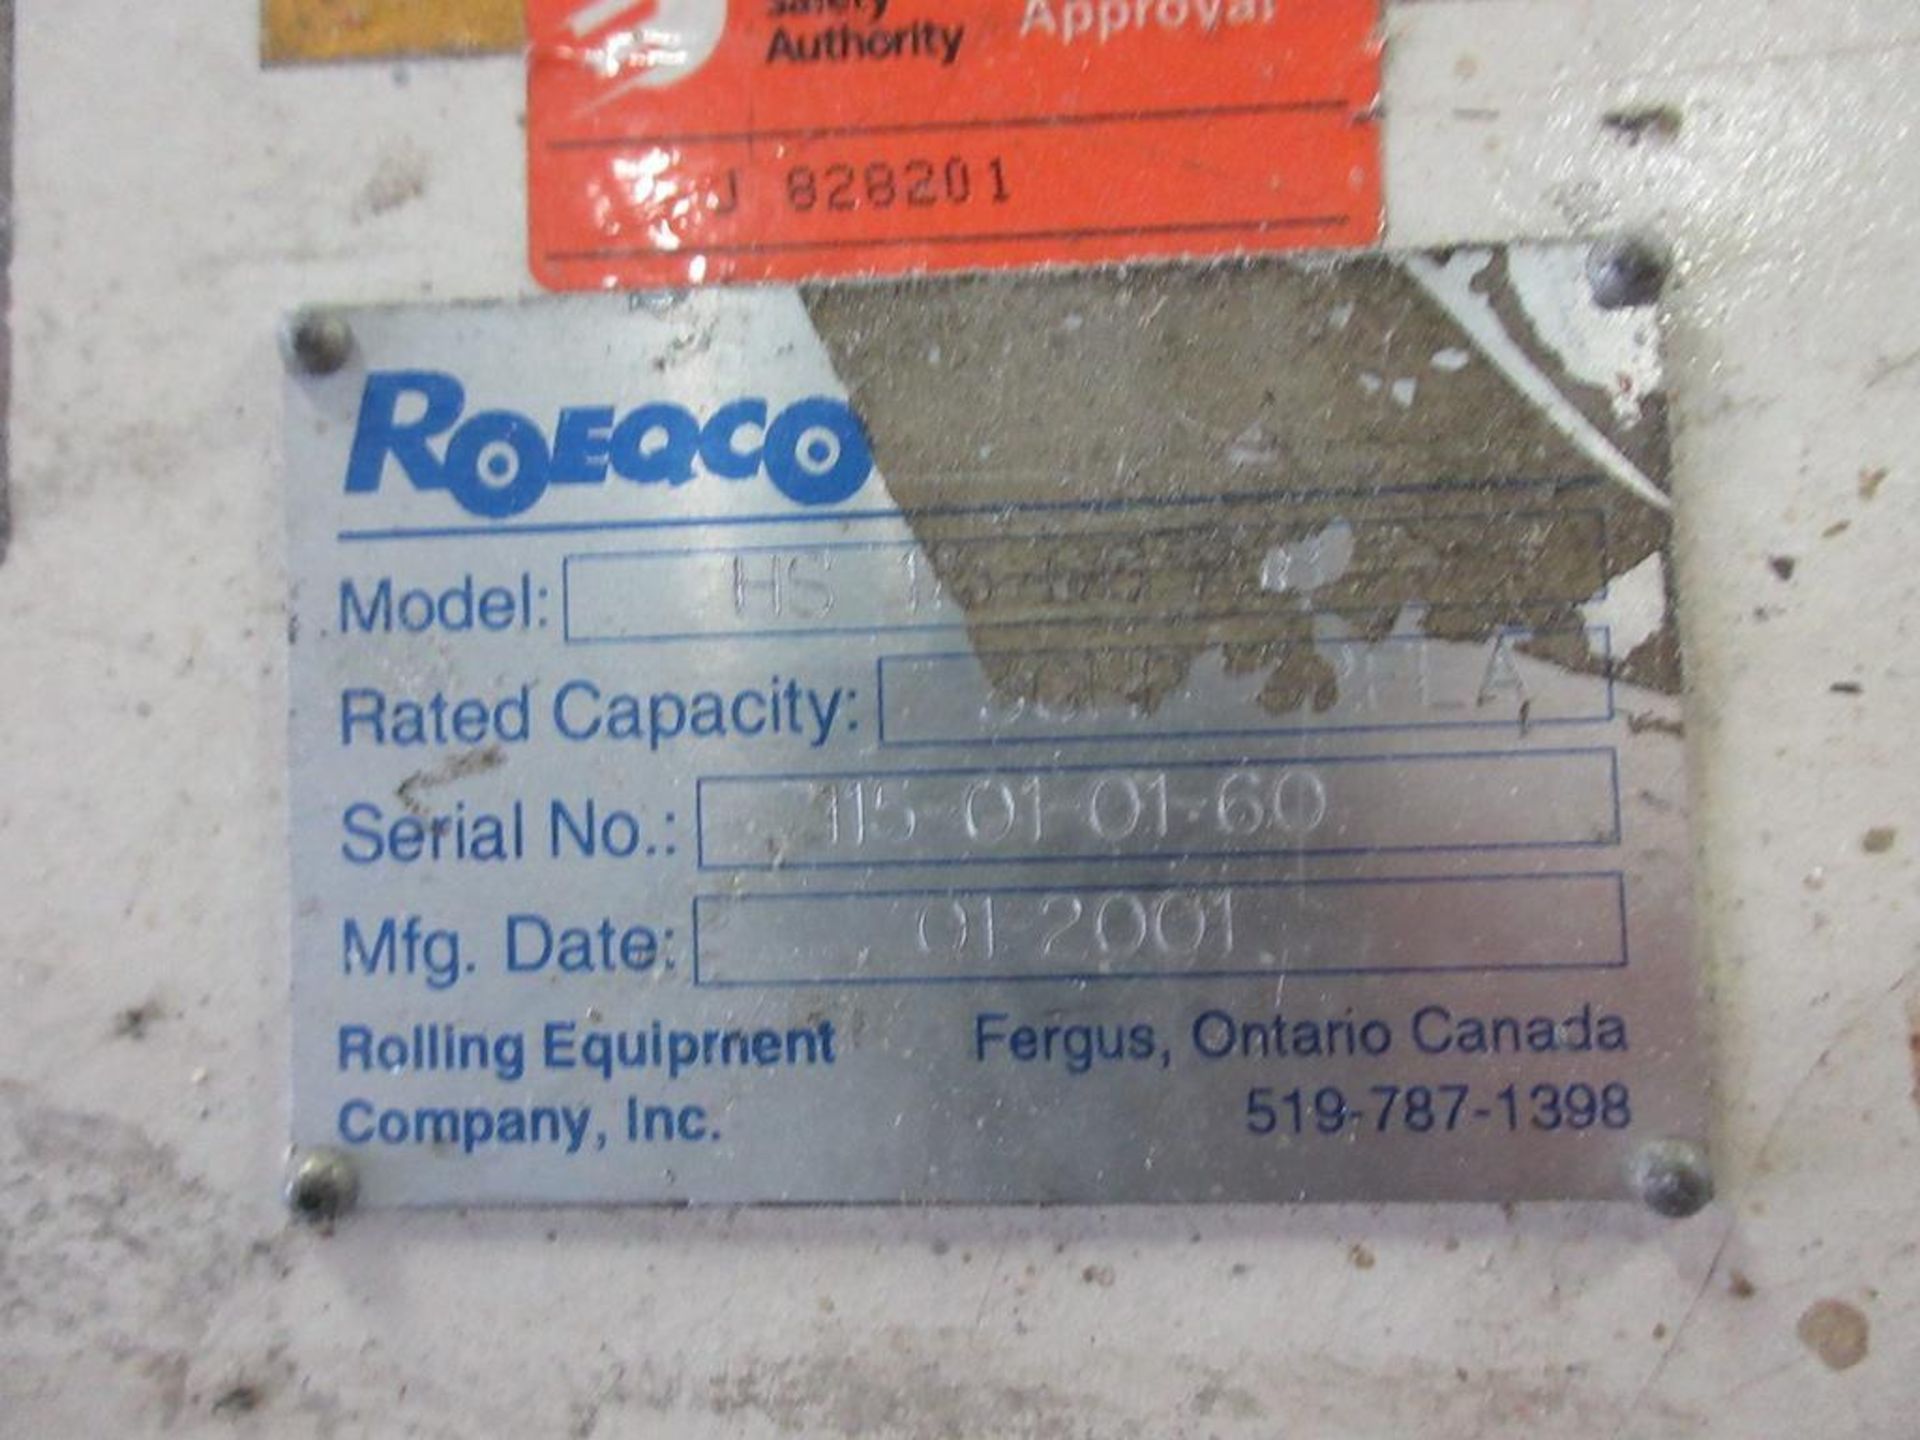 2001 ROEQCO (Rolling Equipment Company Inc) Guillotine, 5' blade, Model HS 115-66-218, sn 115-01-01- - Image 5 of 8